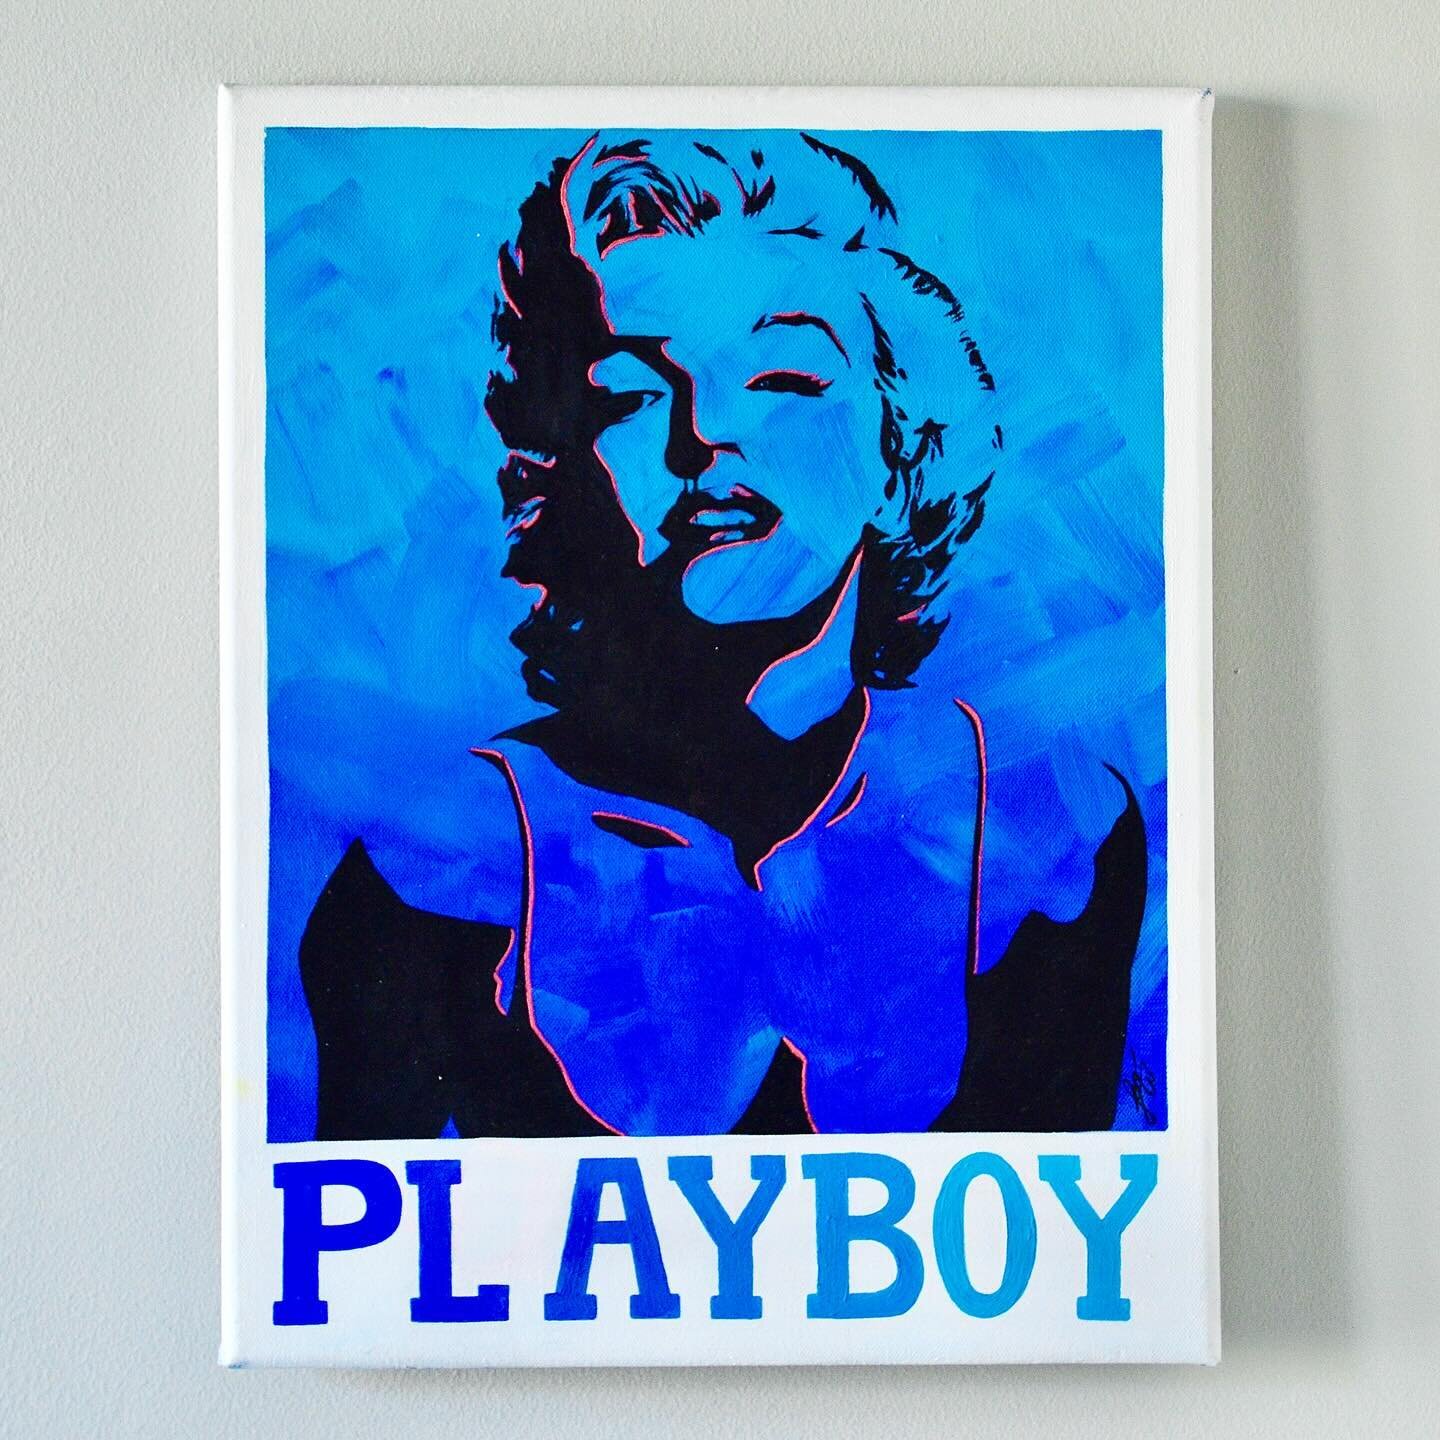 FOR SALE! It&rsquo;s time for some spring cleaning and that means parting with pieces I&rsquo;ve held onto 💙💓

&ldquo;Playboy&rdquo; 
14 x 18
Acrylic on Canvas 
$300

To purchase, you can comment, DM me, or go to my website, where you can see all o